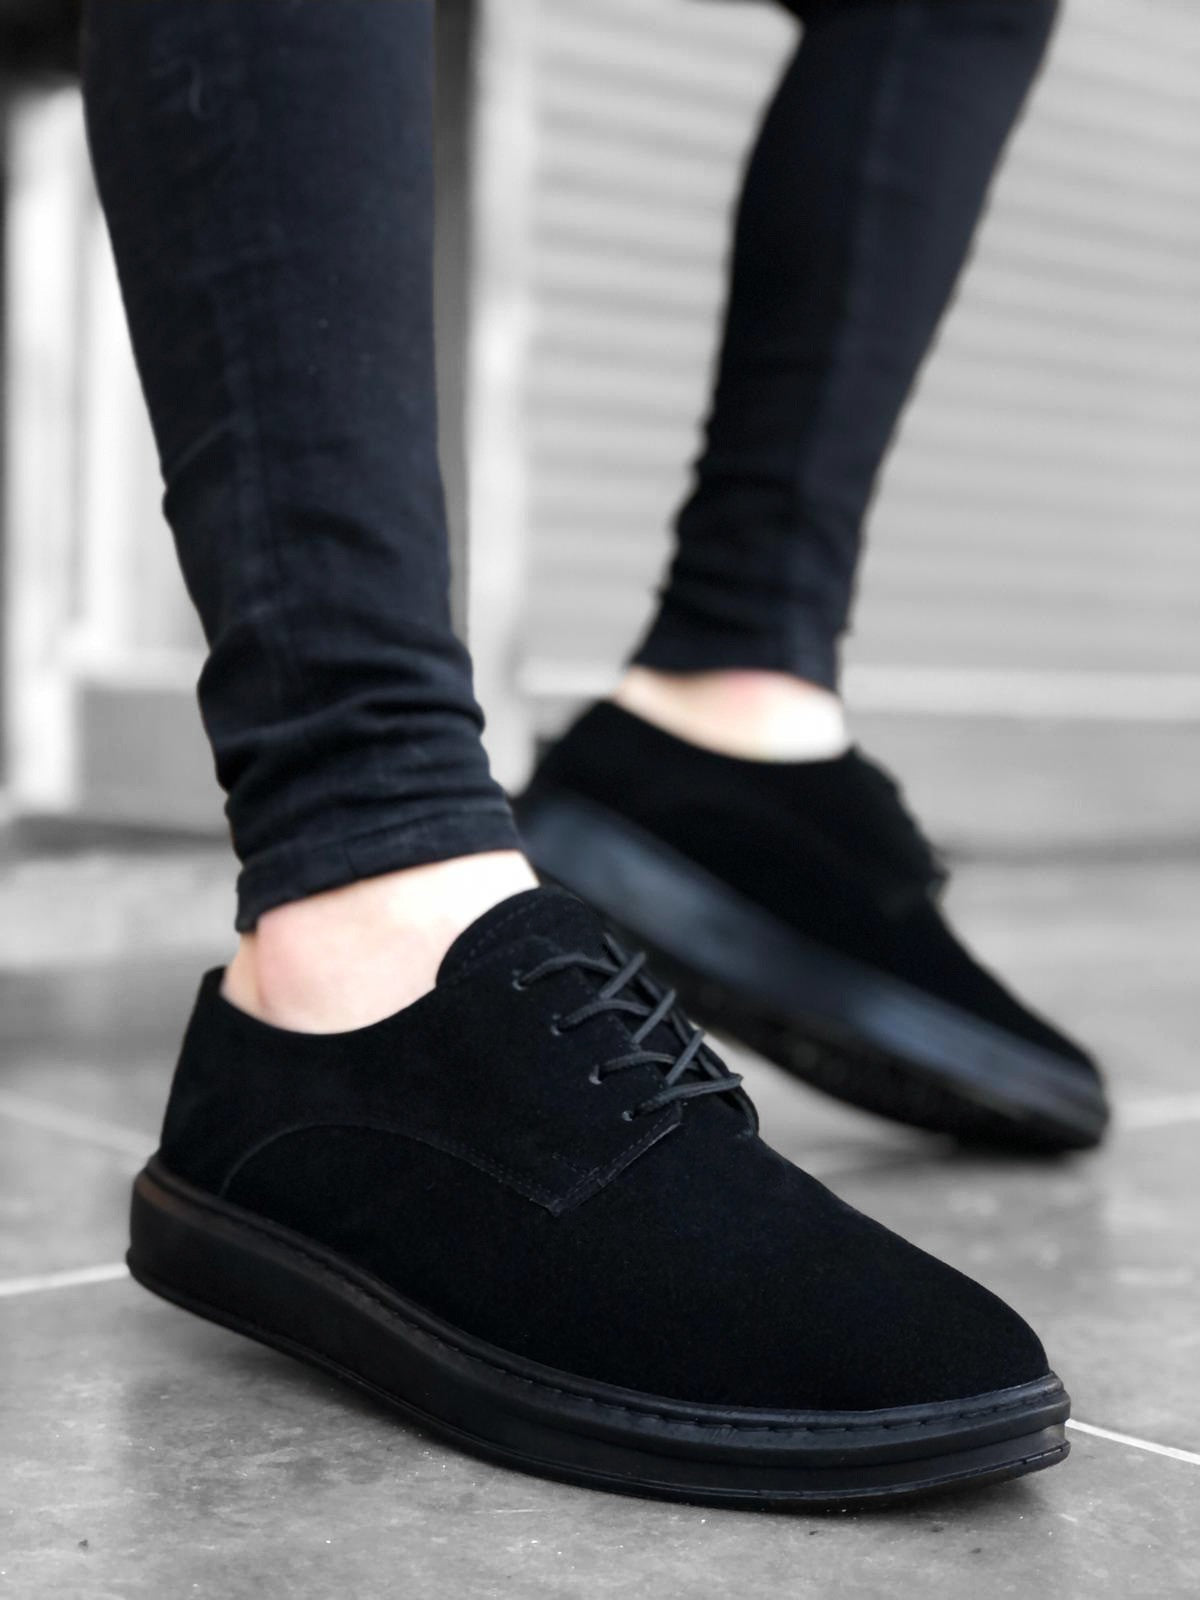 BA0003 Lace-up Suede Classic Black High Sole Casual Men's Shoes - STREETMODE™